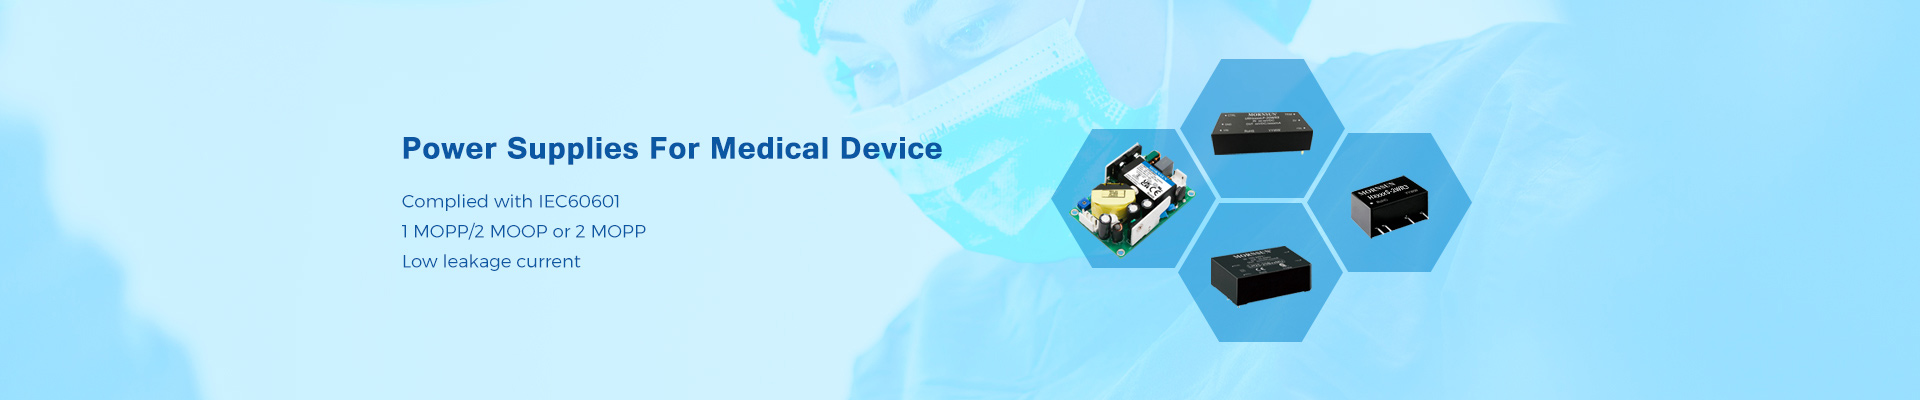 Power supplies for medical devices